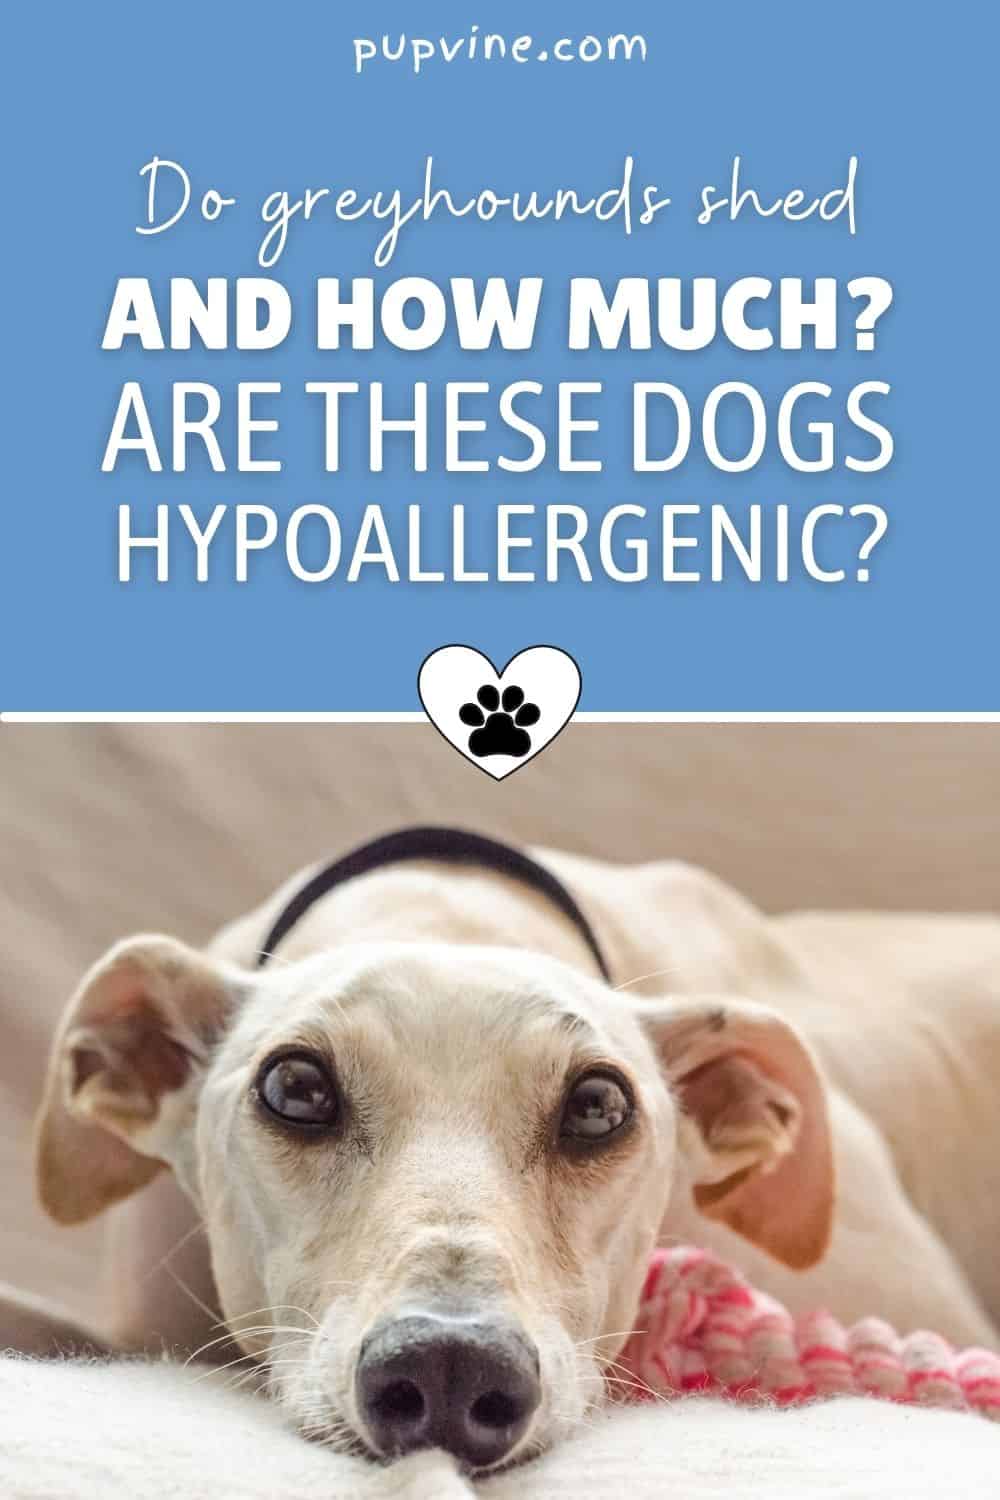 Do Greyhounds Shed And How Much? Are These Dogs Hypoallergenic?